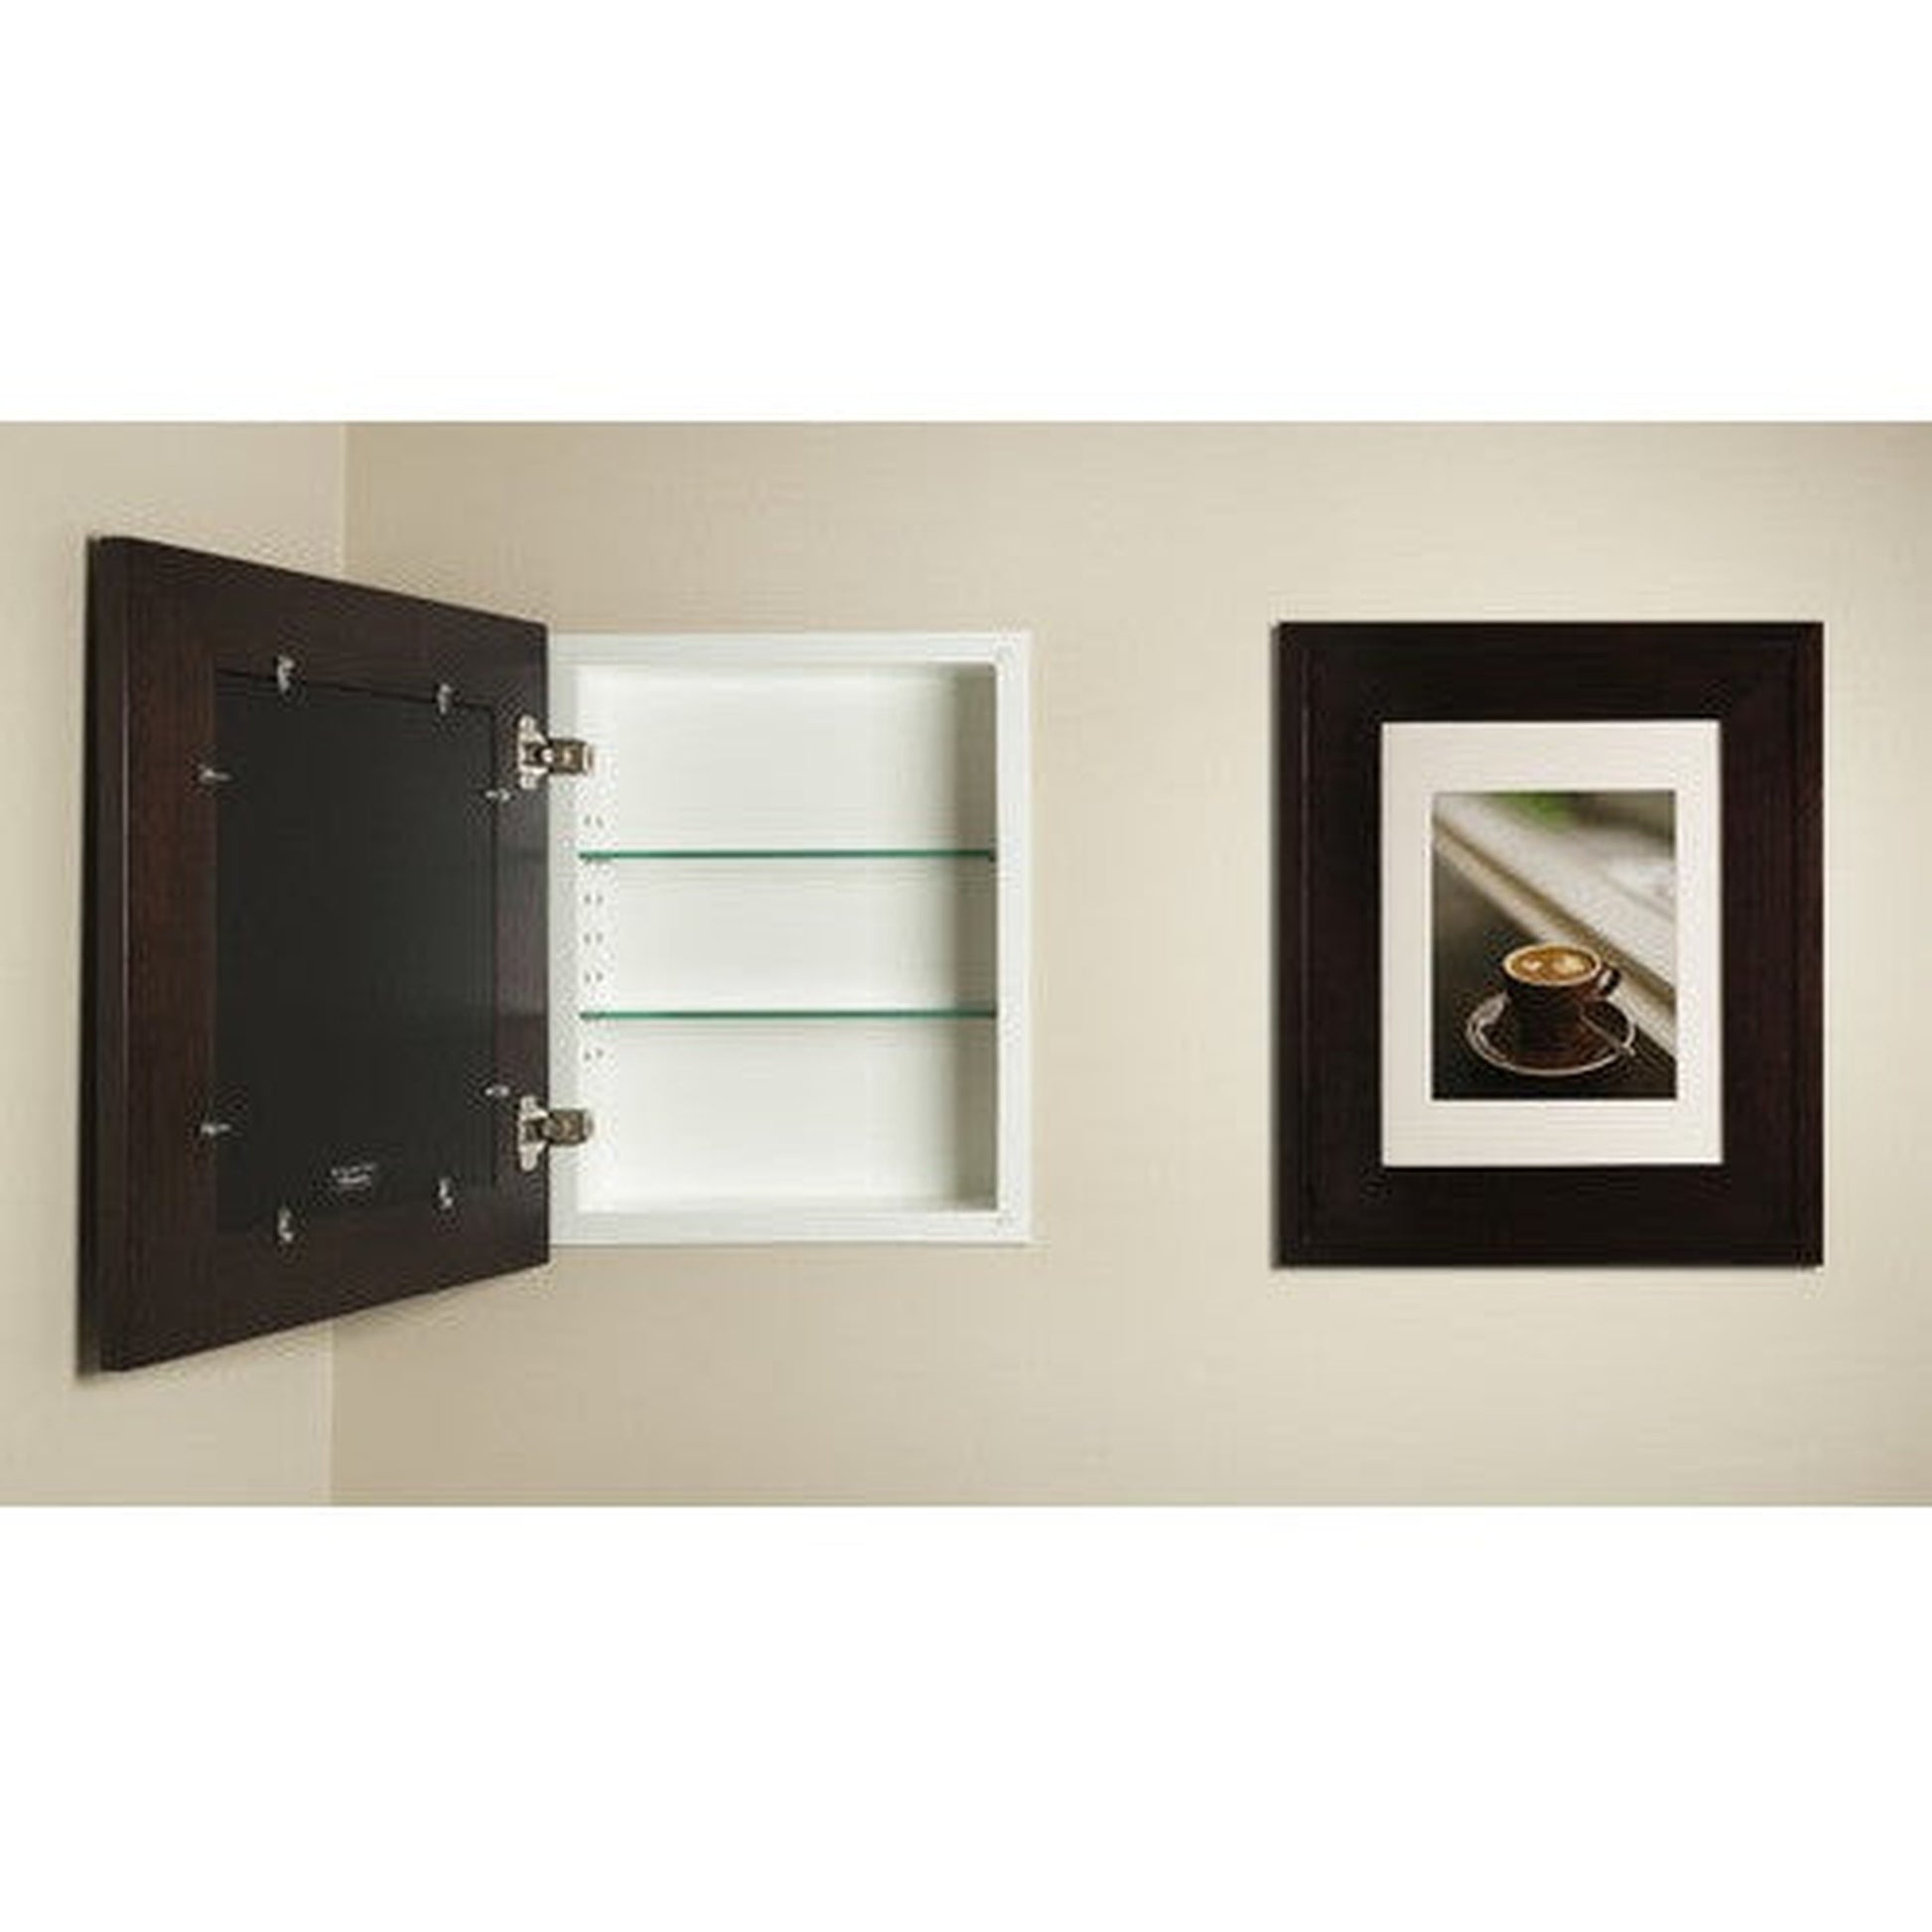 Fox Hollow Furnishings 14" x 18" Coffee Bean Large Special 6" Depth Recessed Picture Frame Medicine Cabinet